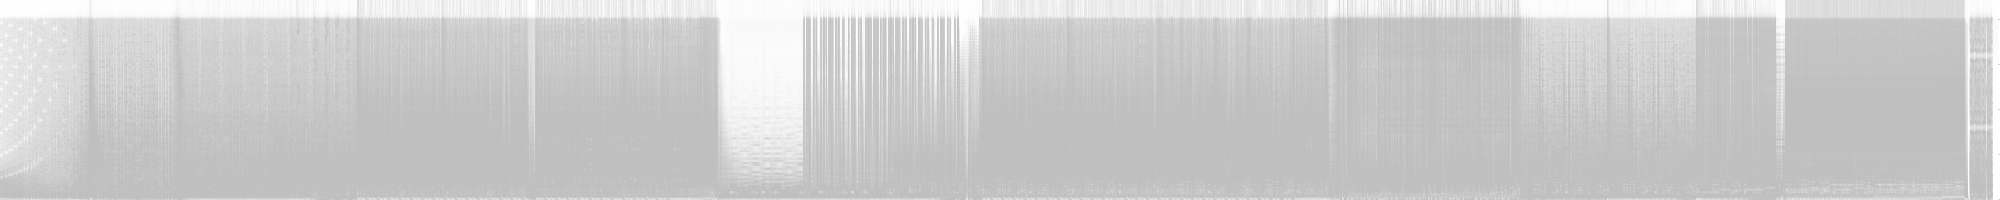 Spectrogram for 12. FUTURE IS COMING ON